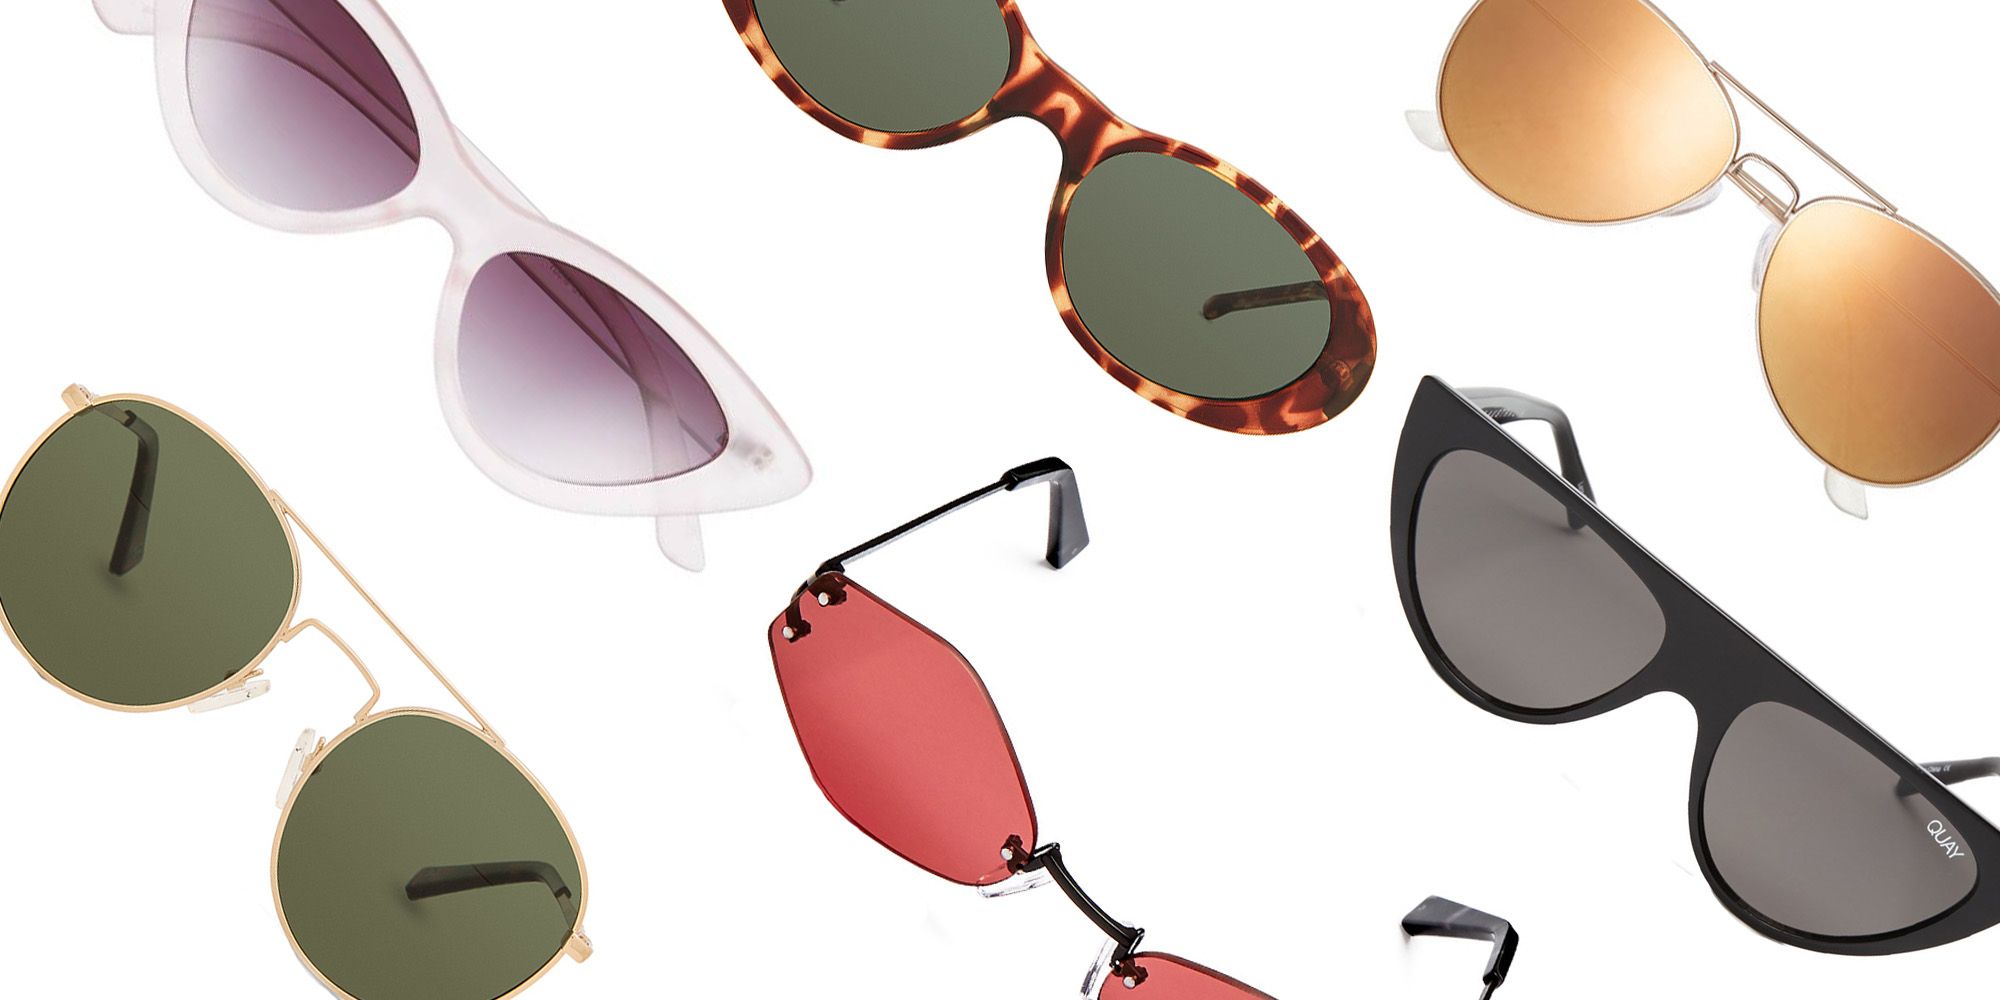 Quay sunglasses: Buy one pair, get one free at the BOGO sale